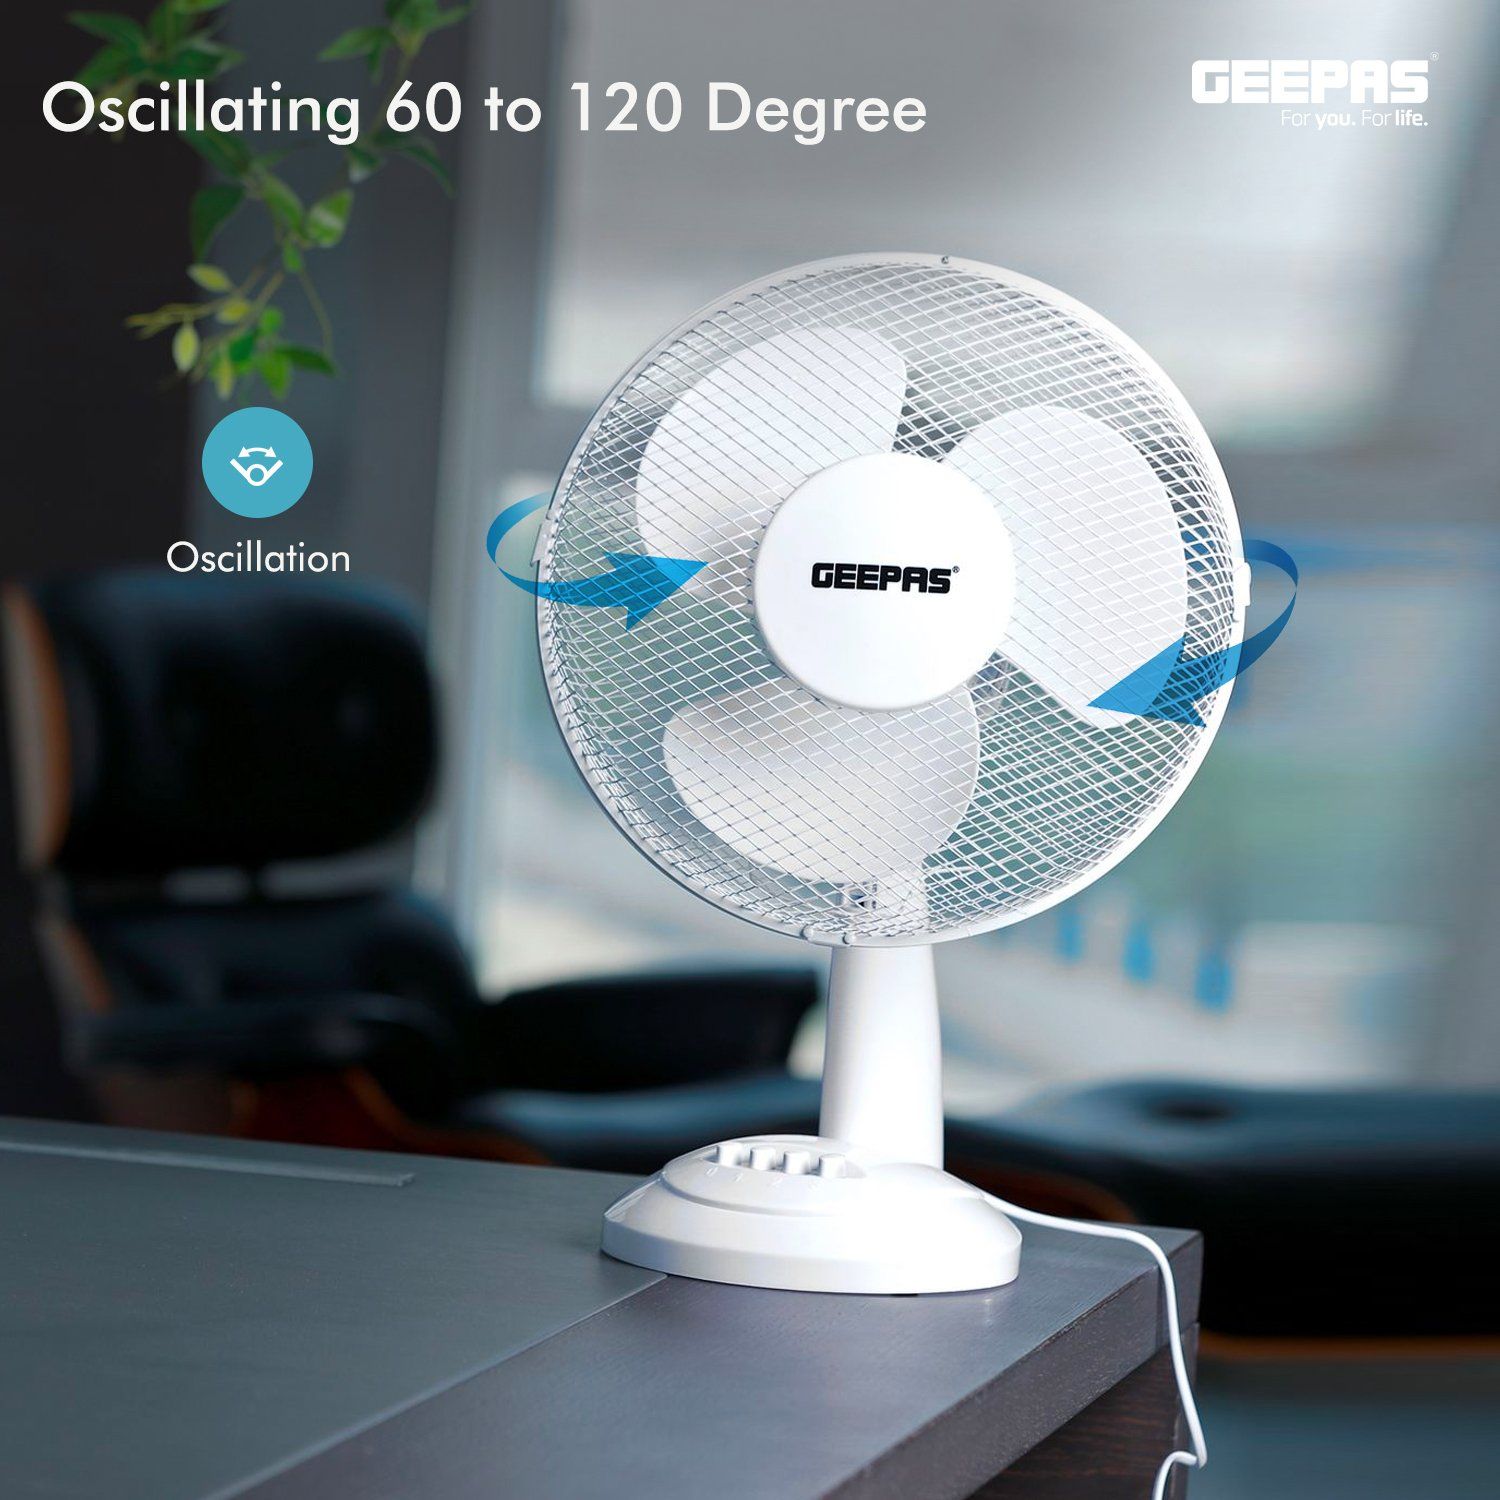 There is a white cooling fan on top of a grey wooden office desk with office furniture and a panoramic view in the background.